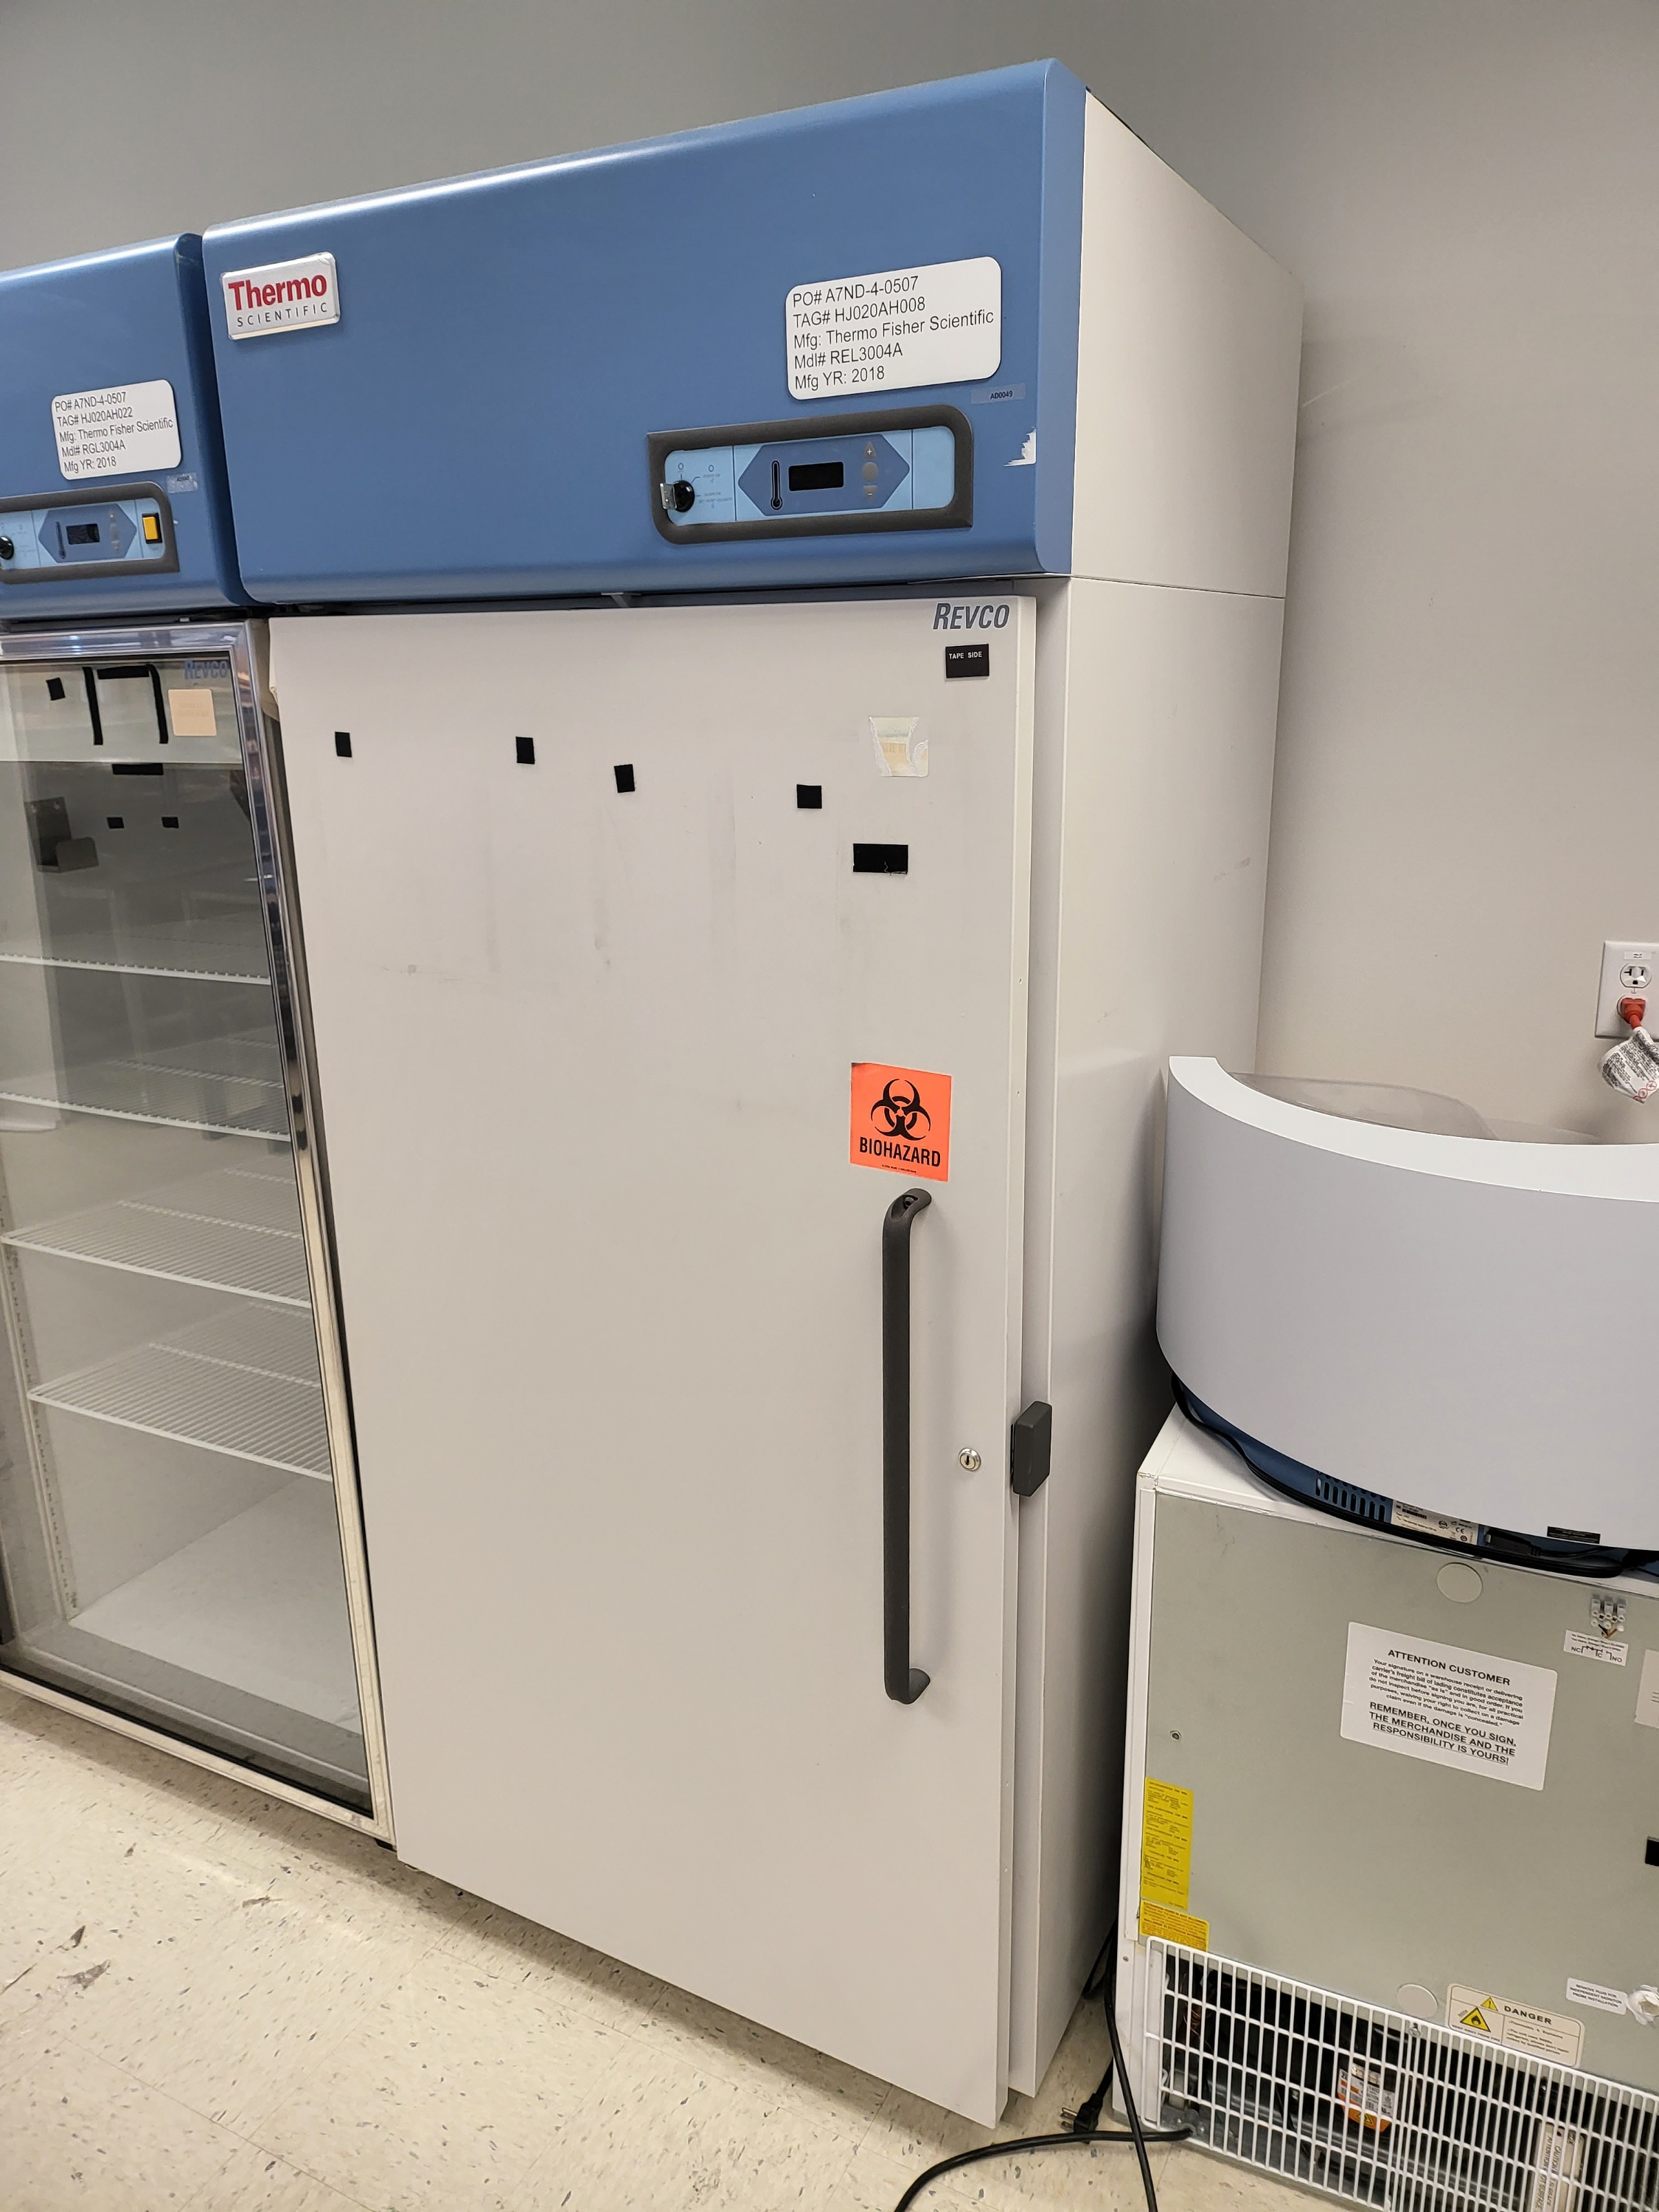 Thermo Revco REL3004A Lab Refrigerator (2018)